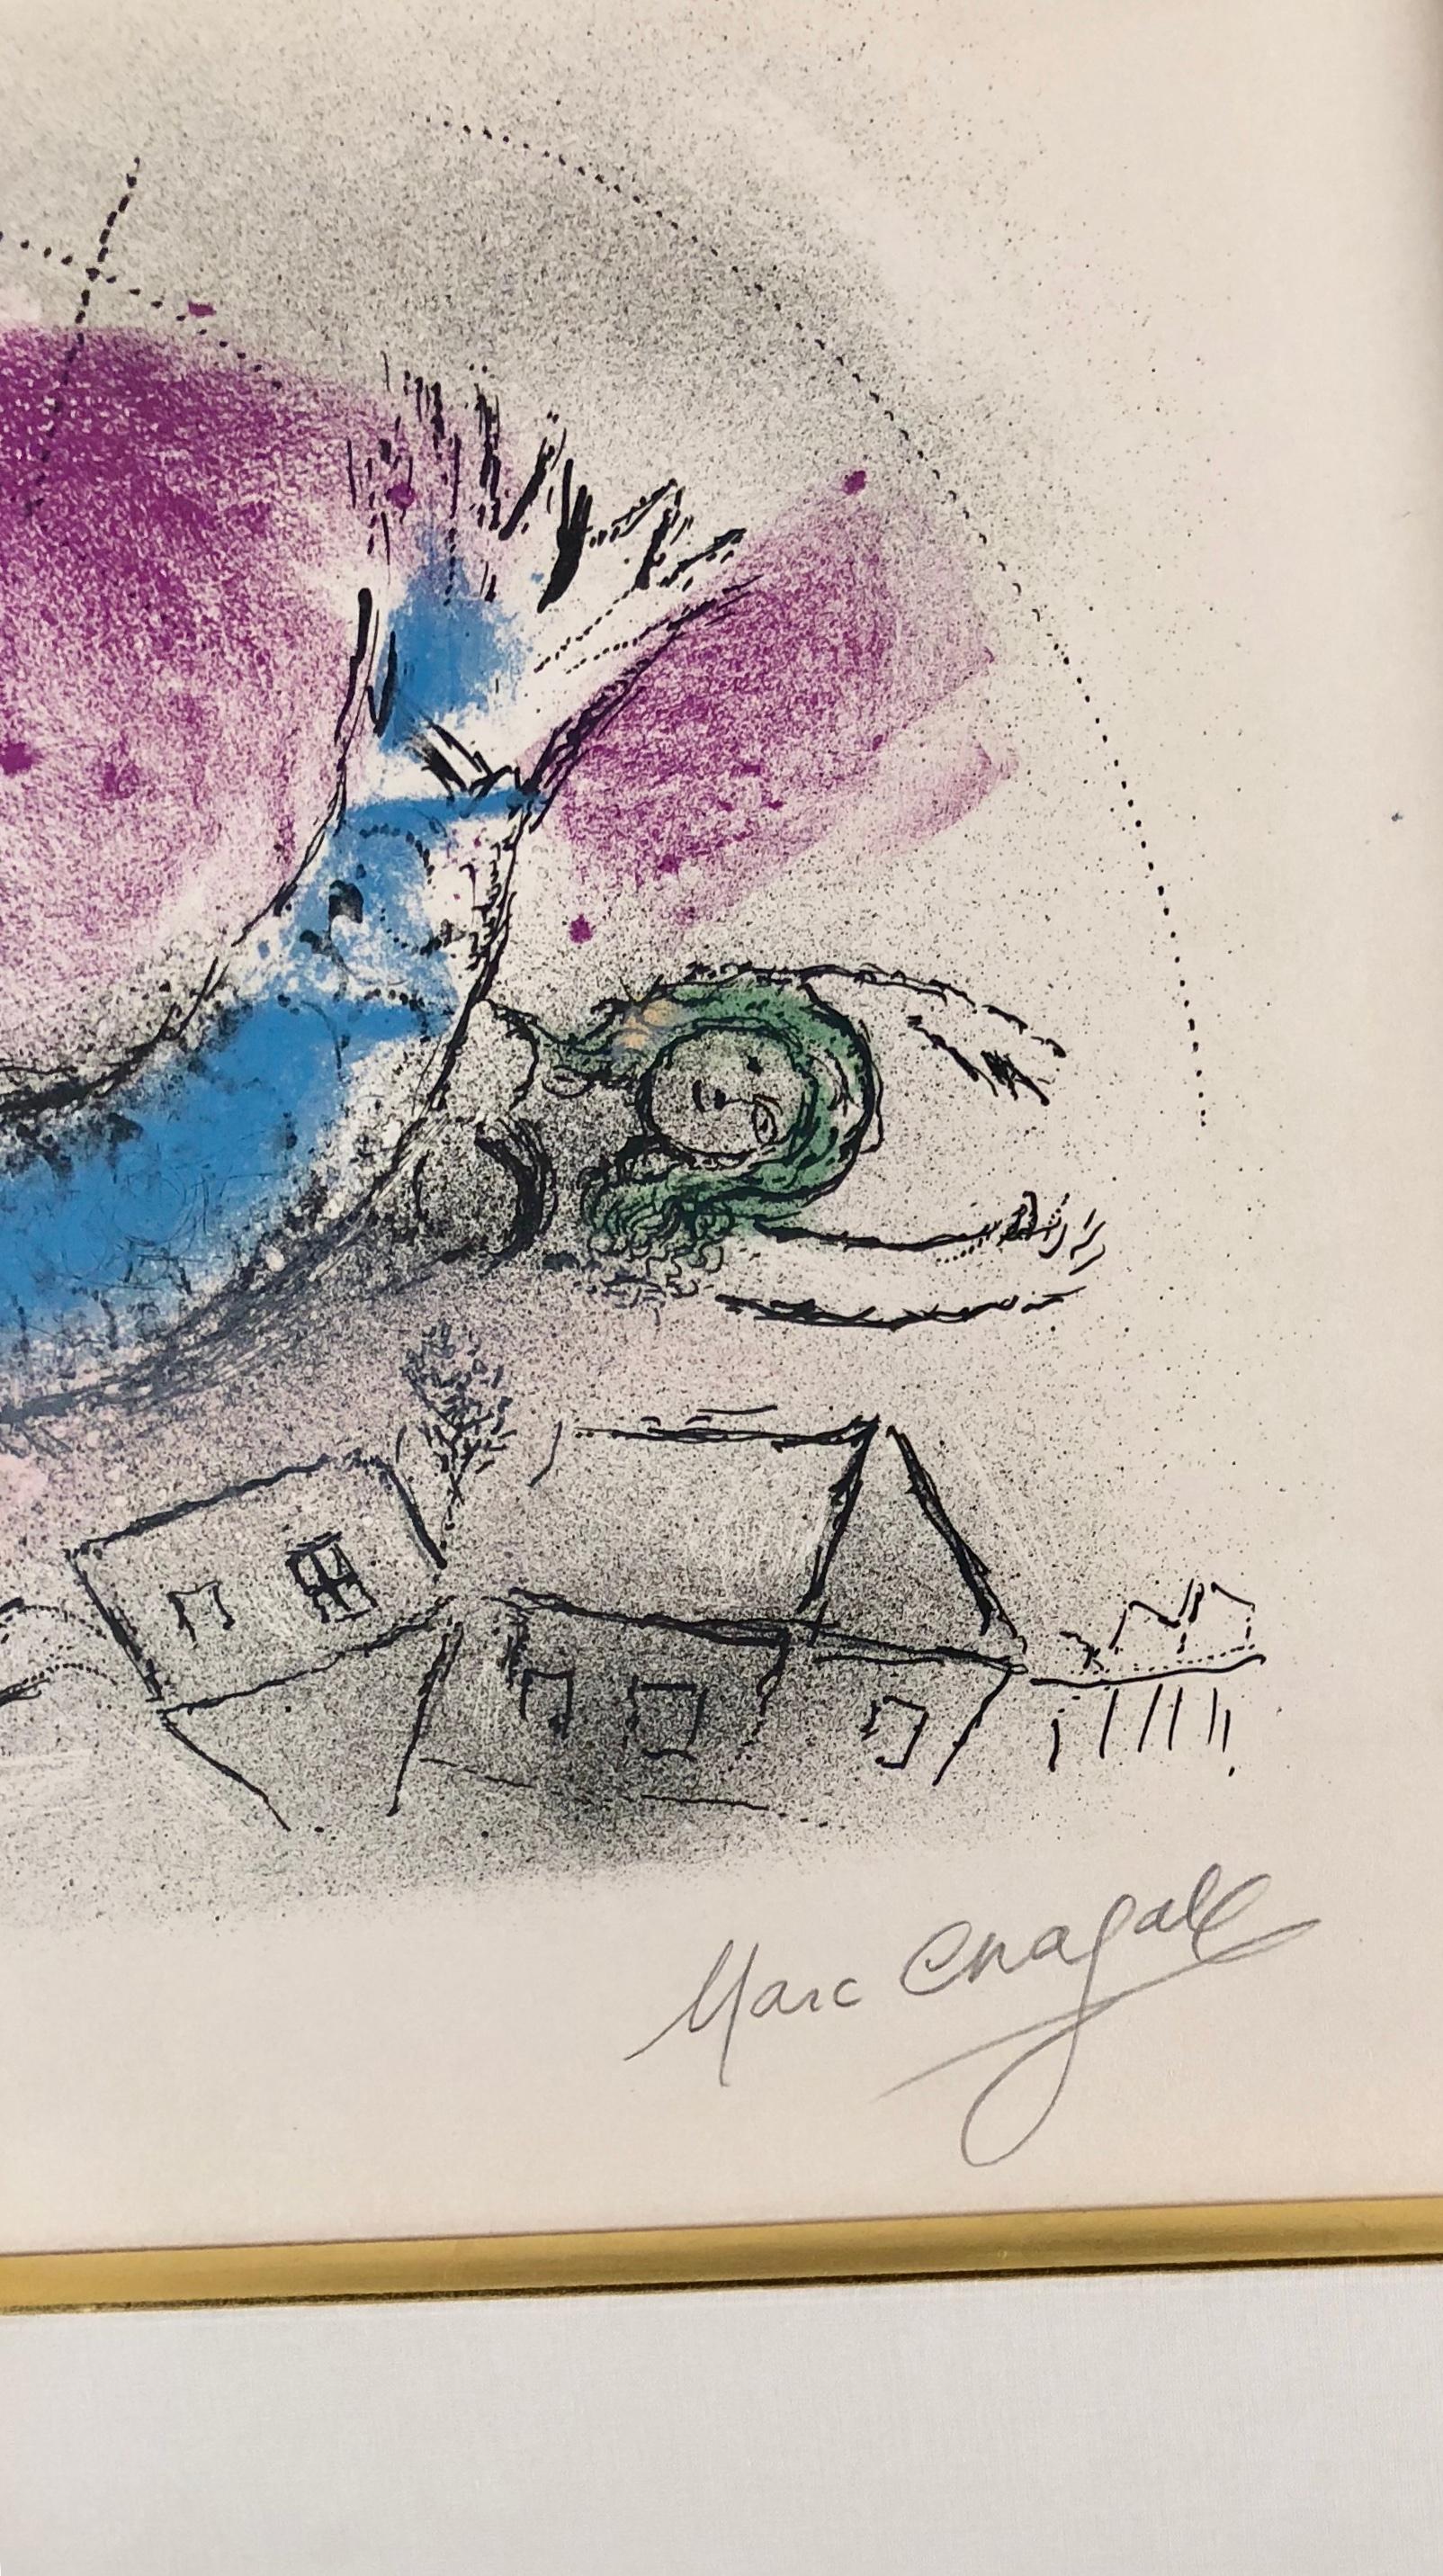 This piece is an original lithograph created by Marc Chagall in 1957. It is hand signed in pencil by Marc Chagall and numbered 25/90 from the edition of 90. The frame of this piece measures 24 x 30.5 inches and the image measures 12 x 19 inches It